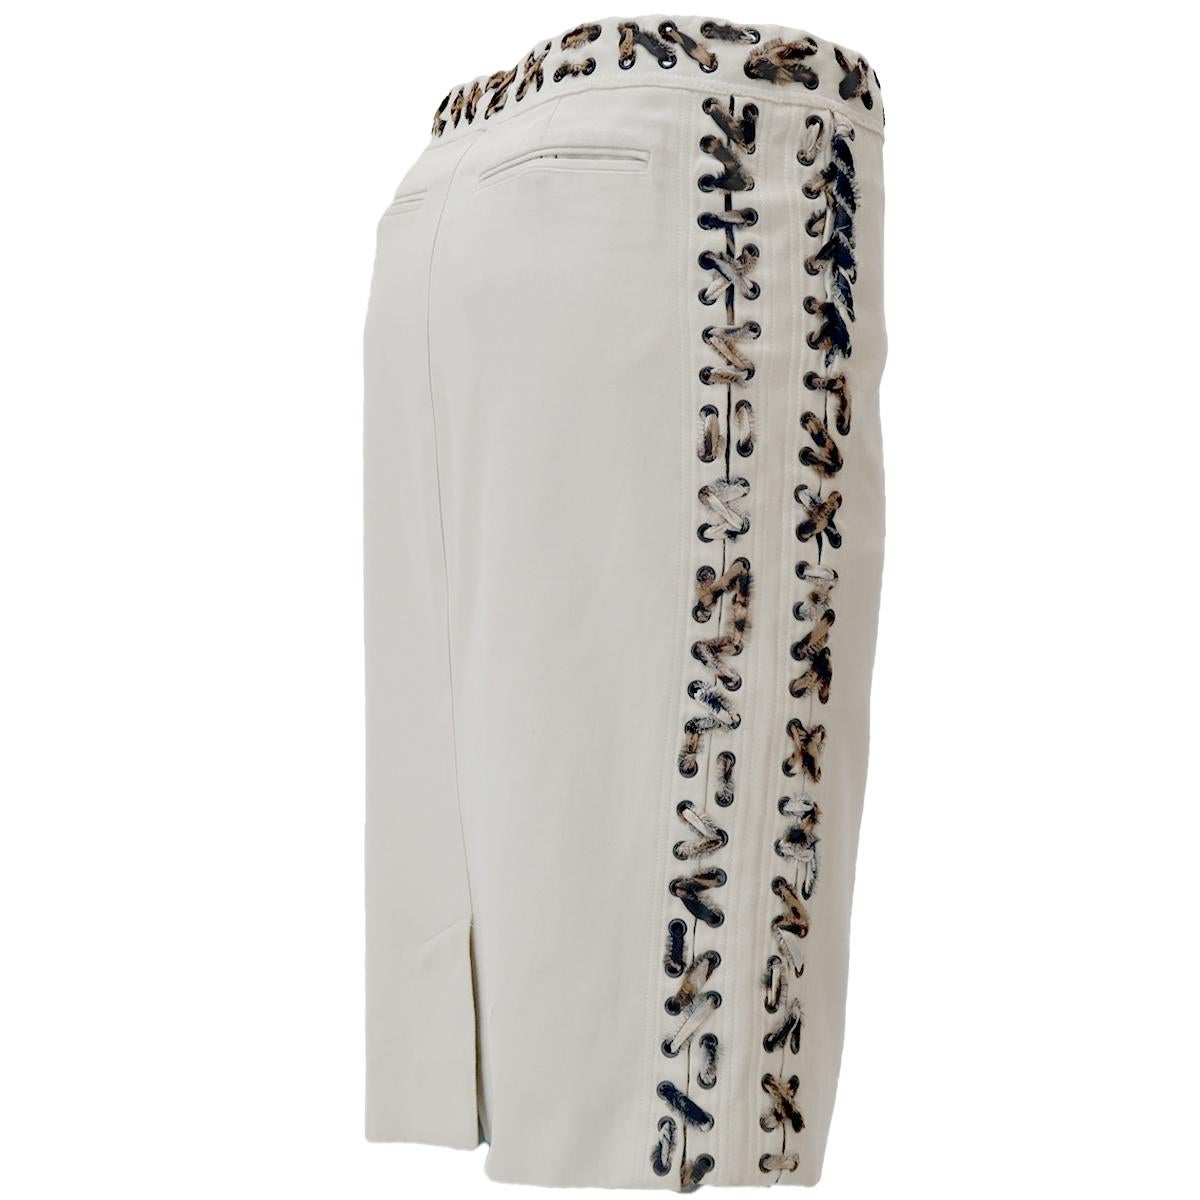 Beige Yves Saint Laurent by Tom Ford SS-02 Cotton Laced Safari Skirt with Leopard Trim For Sale